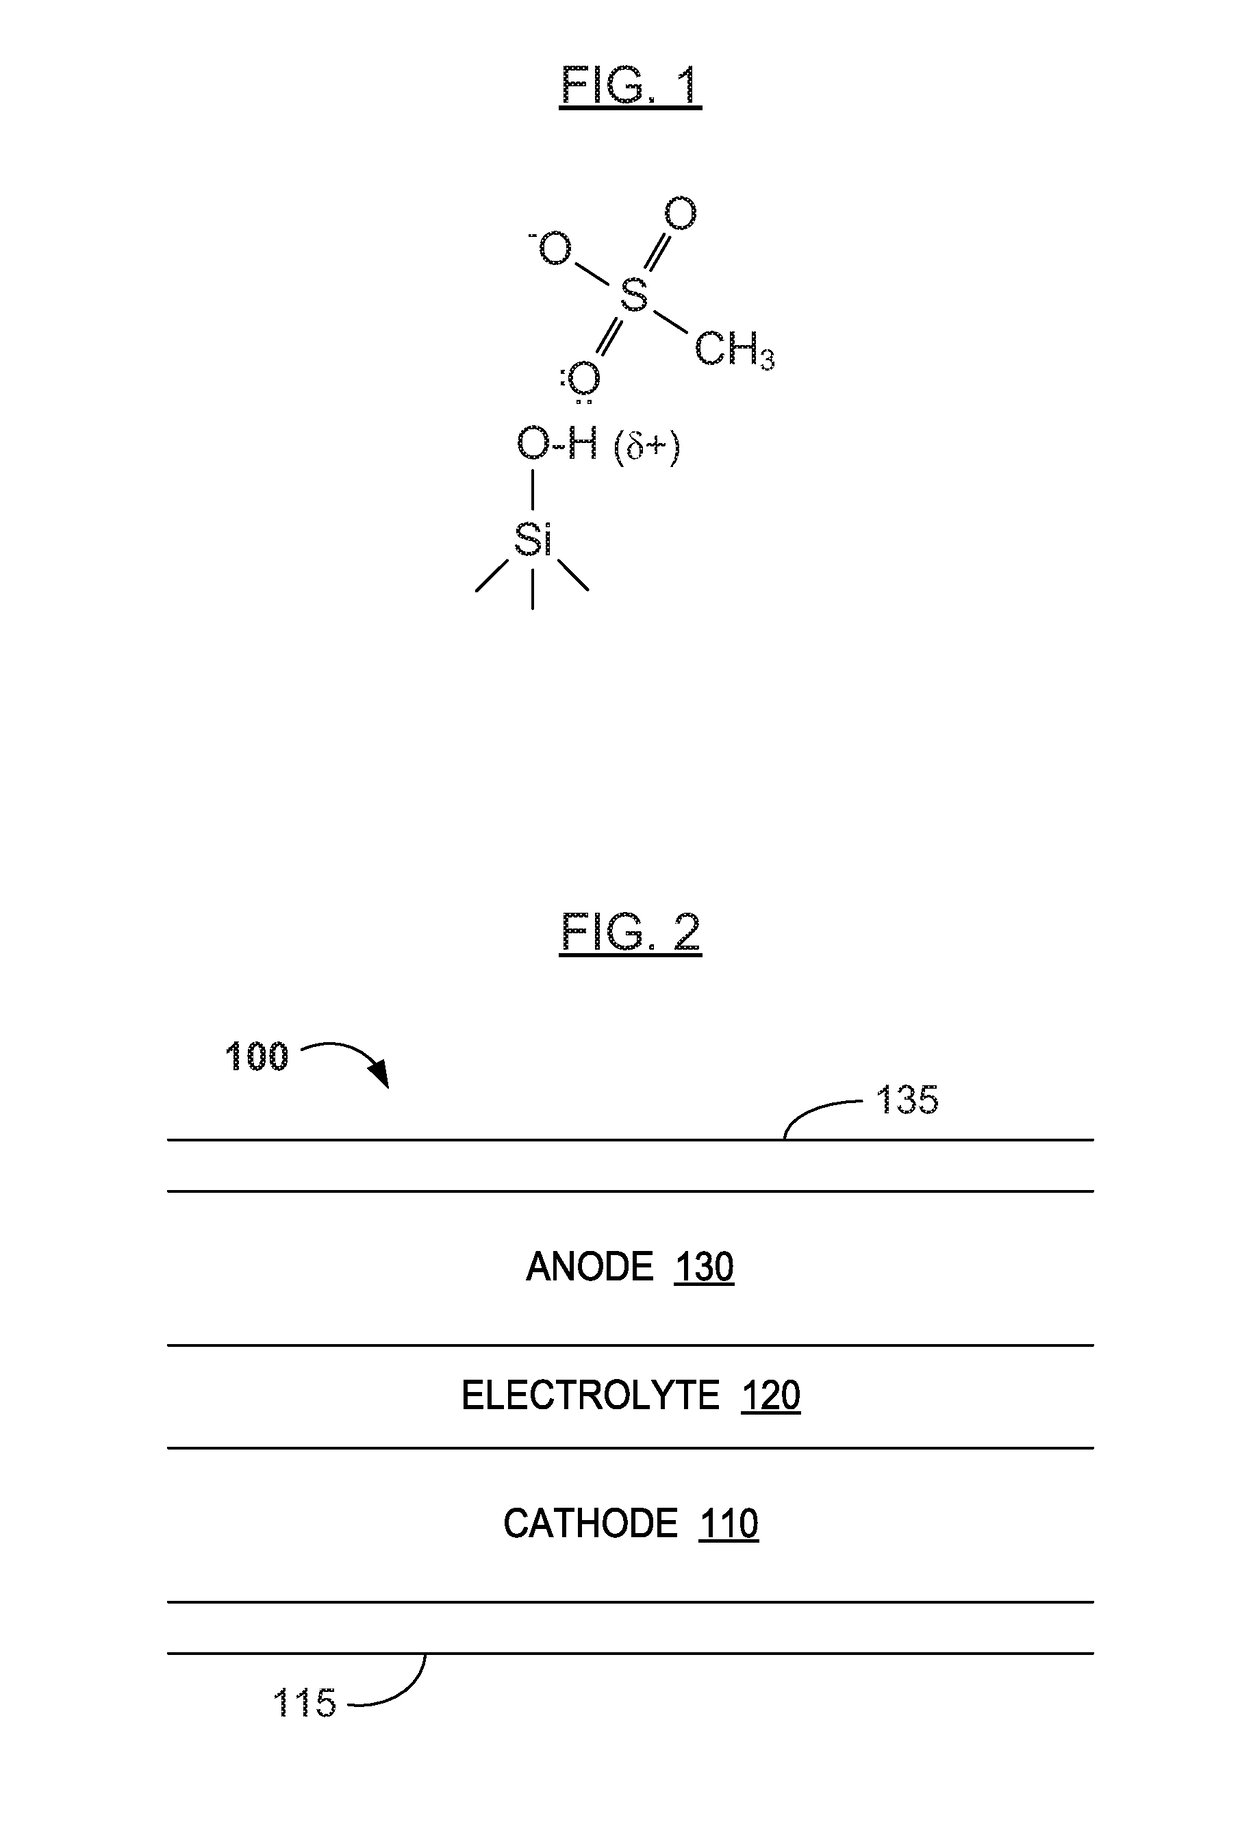 Ionic Liquid Gel for Electrolyte, Method of and Ink for Making the Same, and Printed Batteries Including Such Ionic Liquid Gels and/or Electrolytes